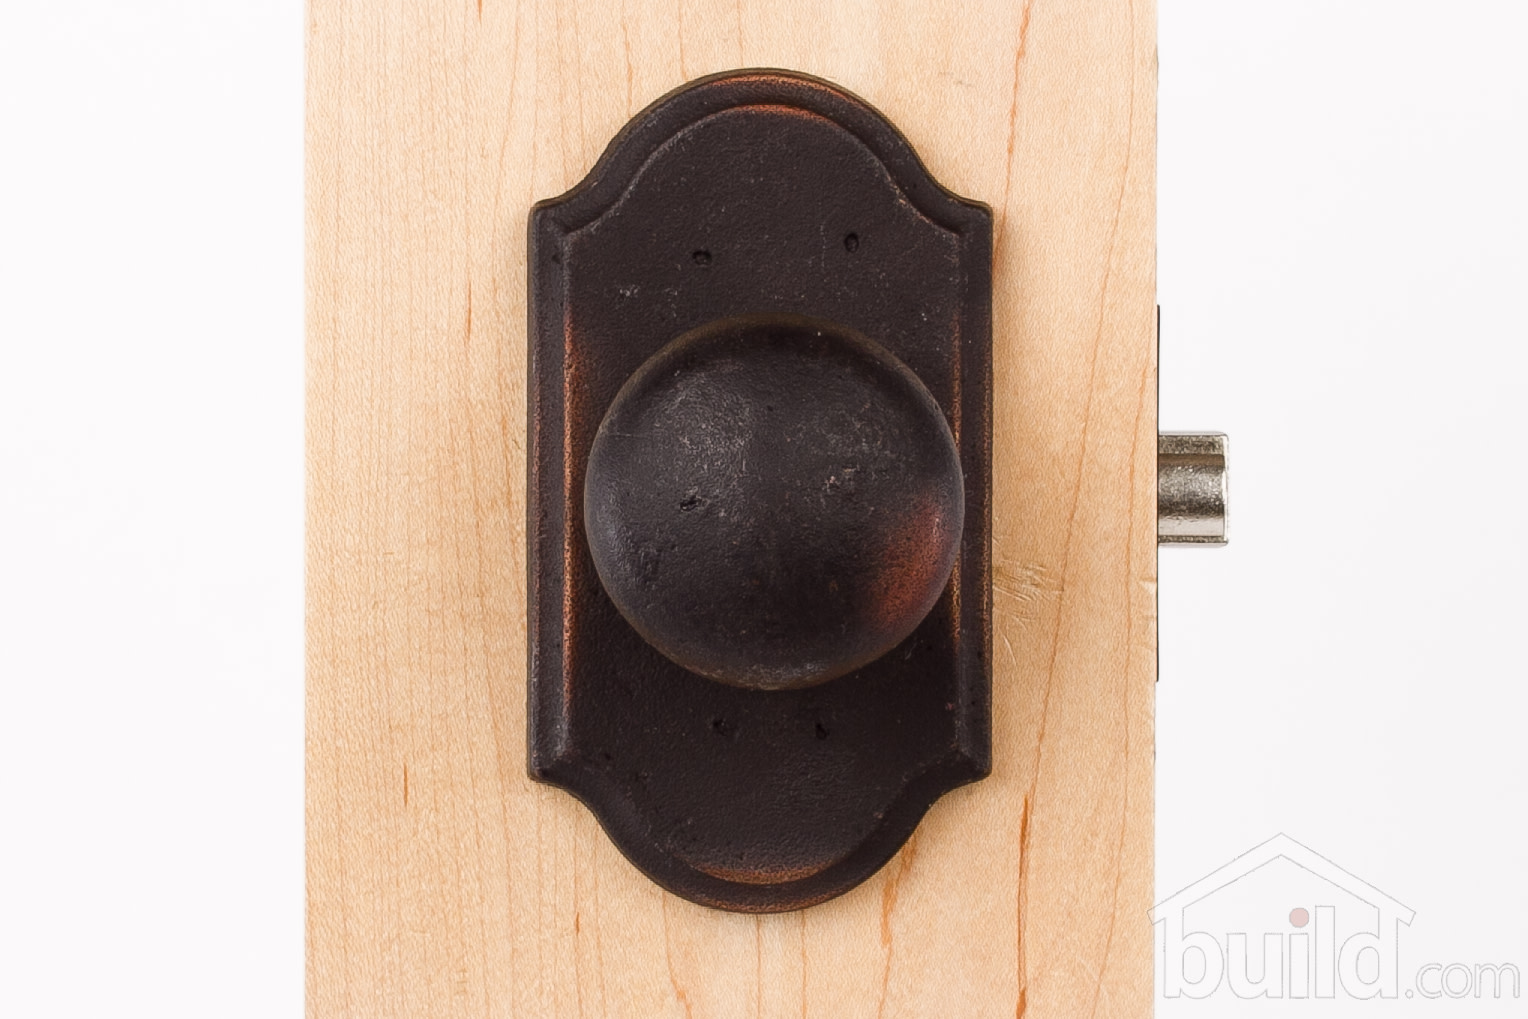 Weslock 07140F1F1SL23 Wexford Premiere Entry Lock with Adjustable Latch and Full Lip Strike Oil Rubbed Bronze Finish - image 4 of 7